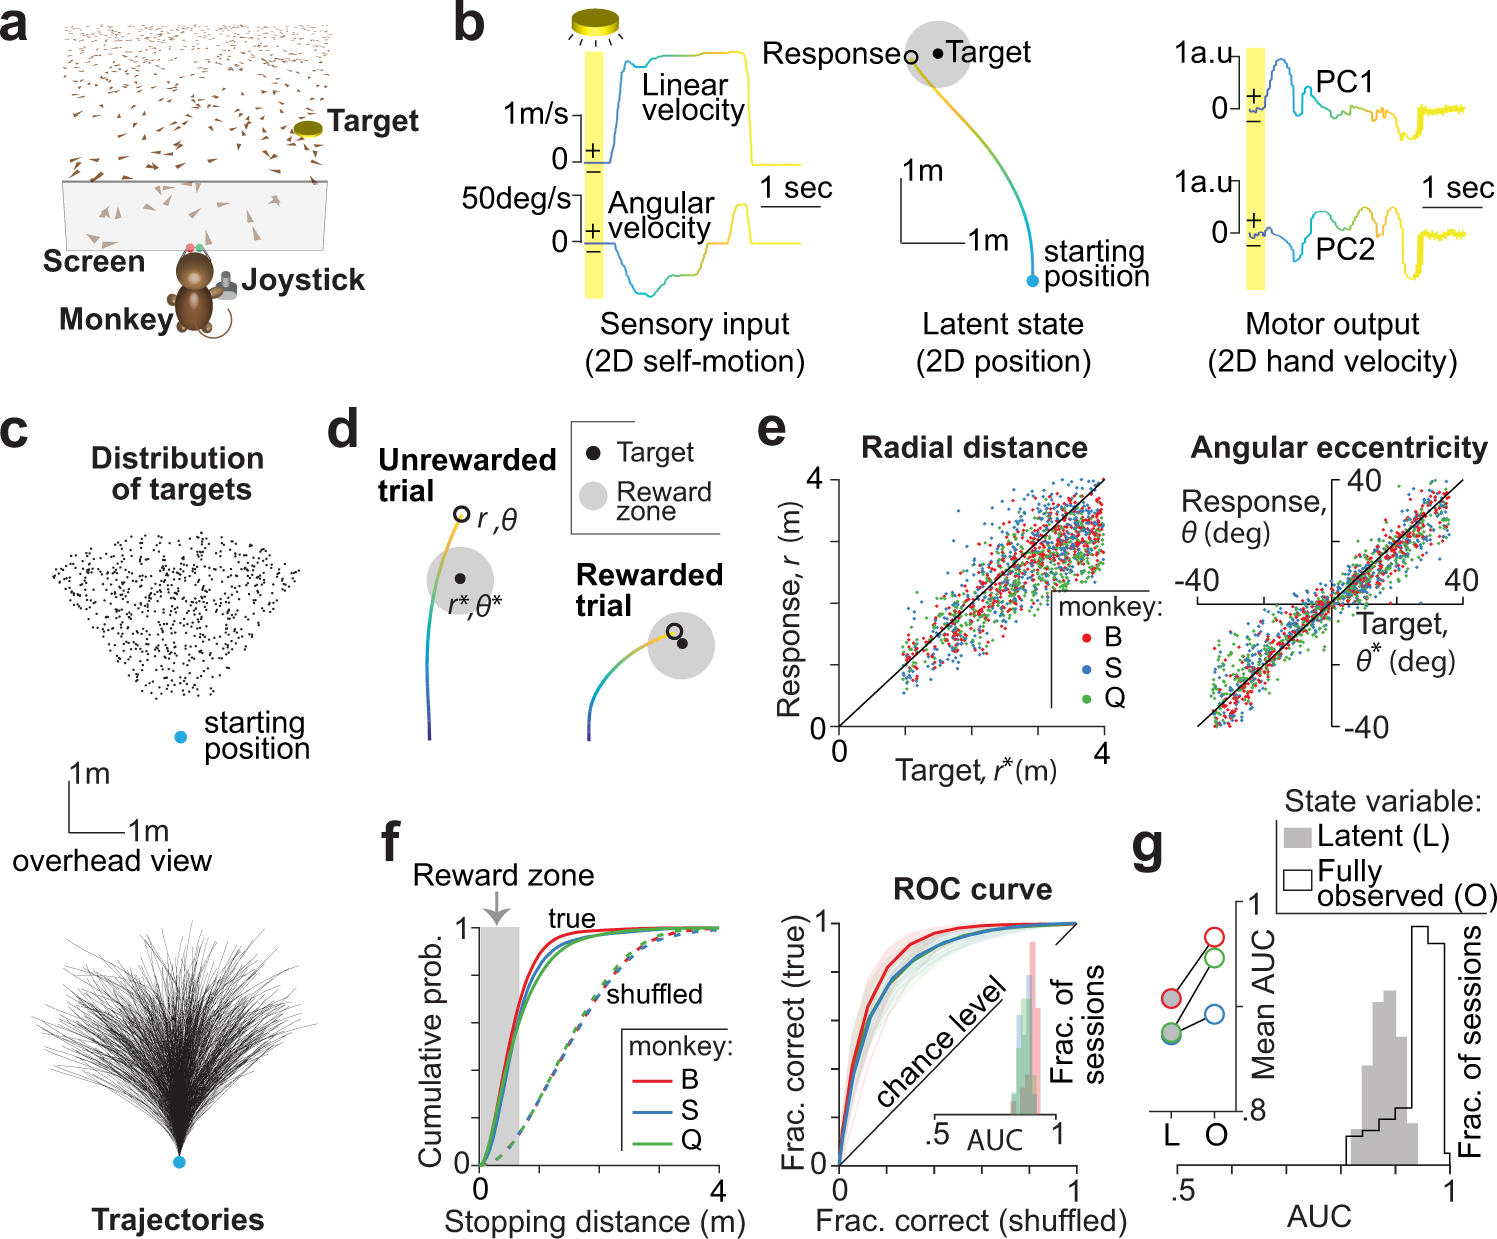 Mouse number and measurement accuracy of categorical responses defined